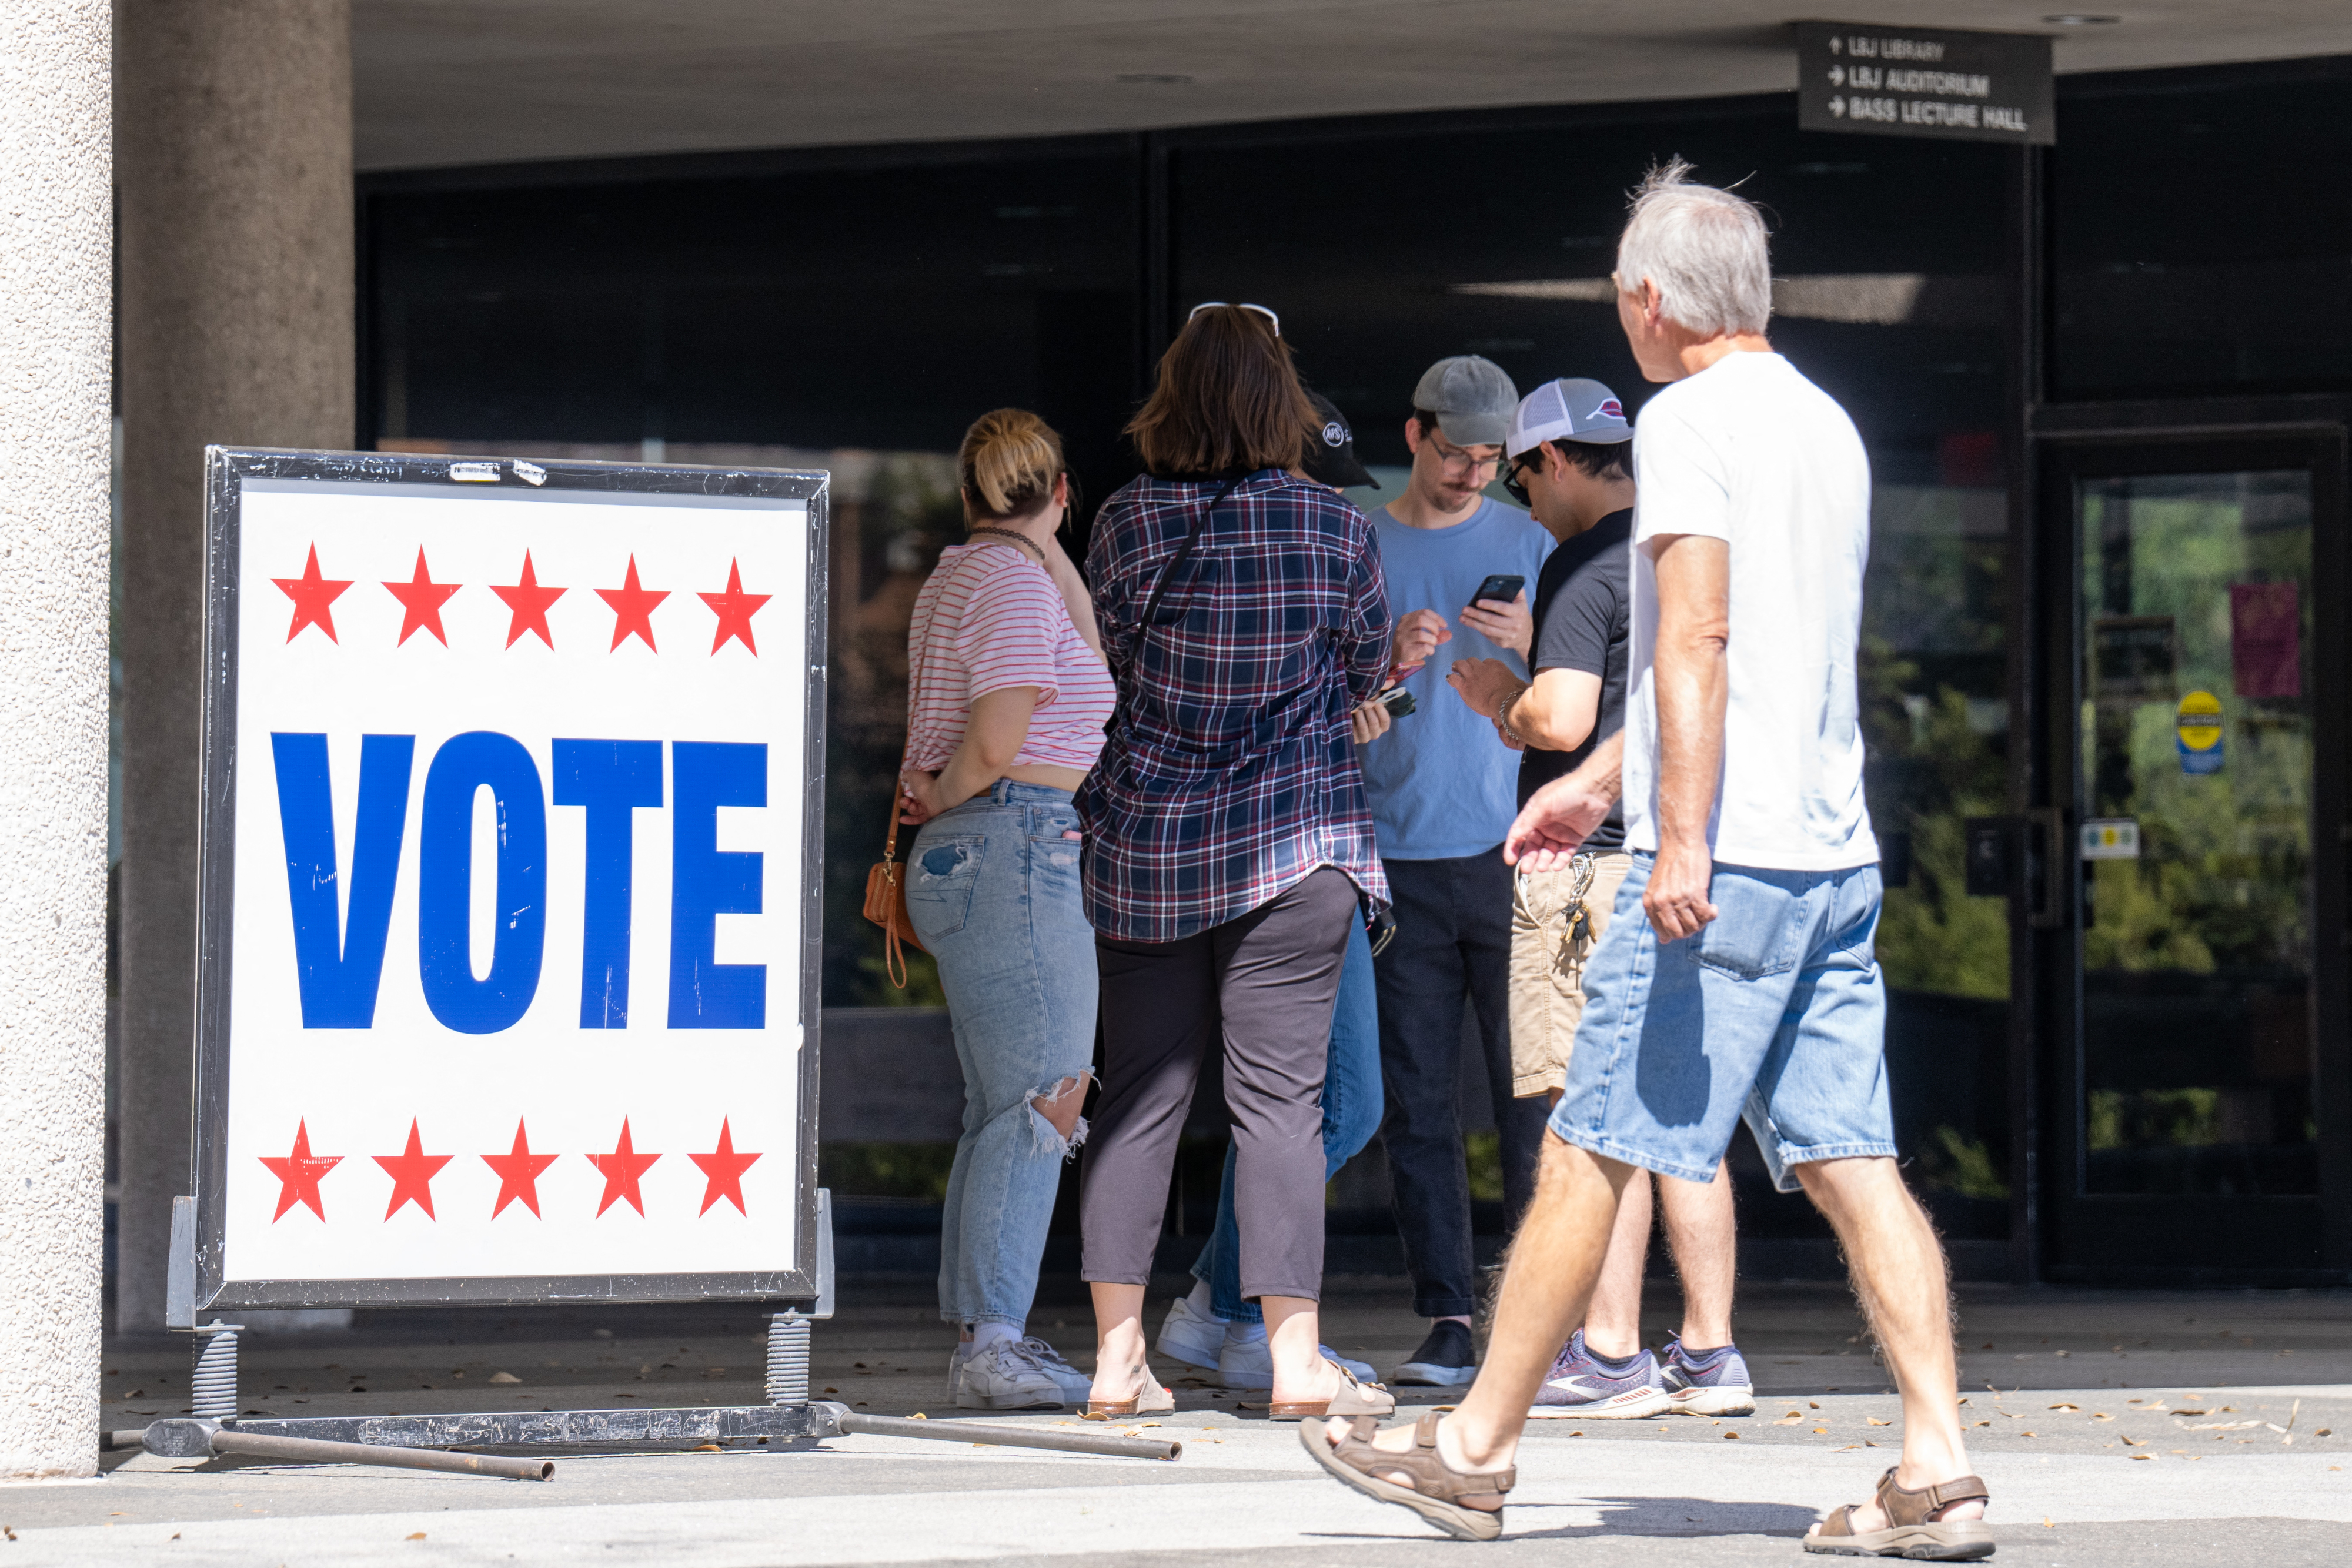 A group of people by a &#x27;VOTE&#x27; sign with stars, indicating a polling station entrance